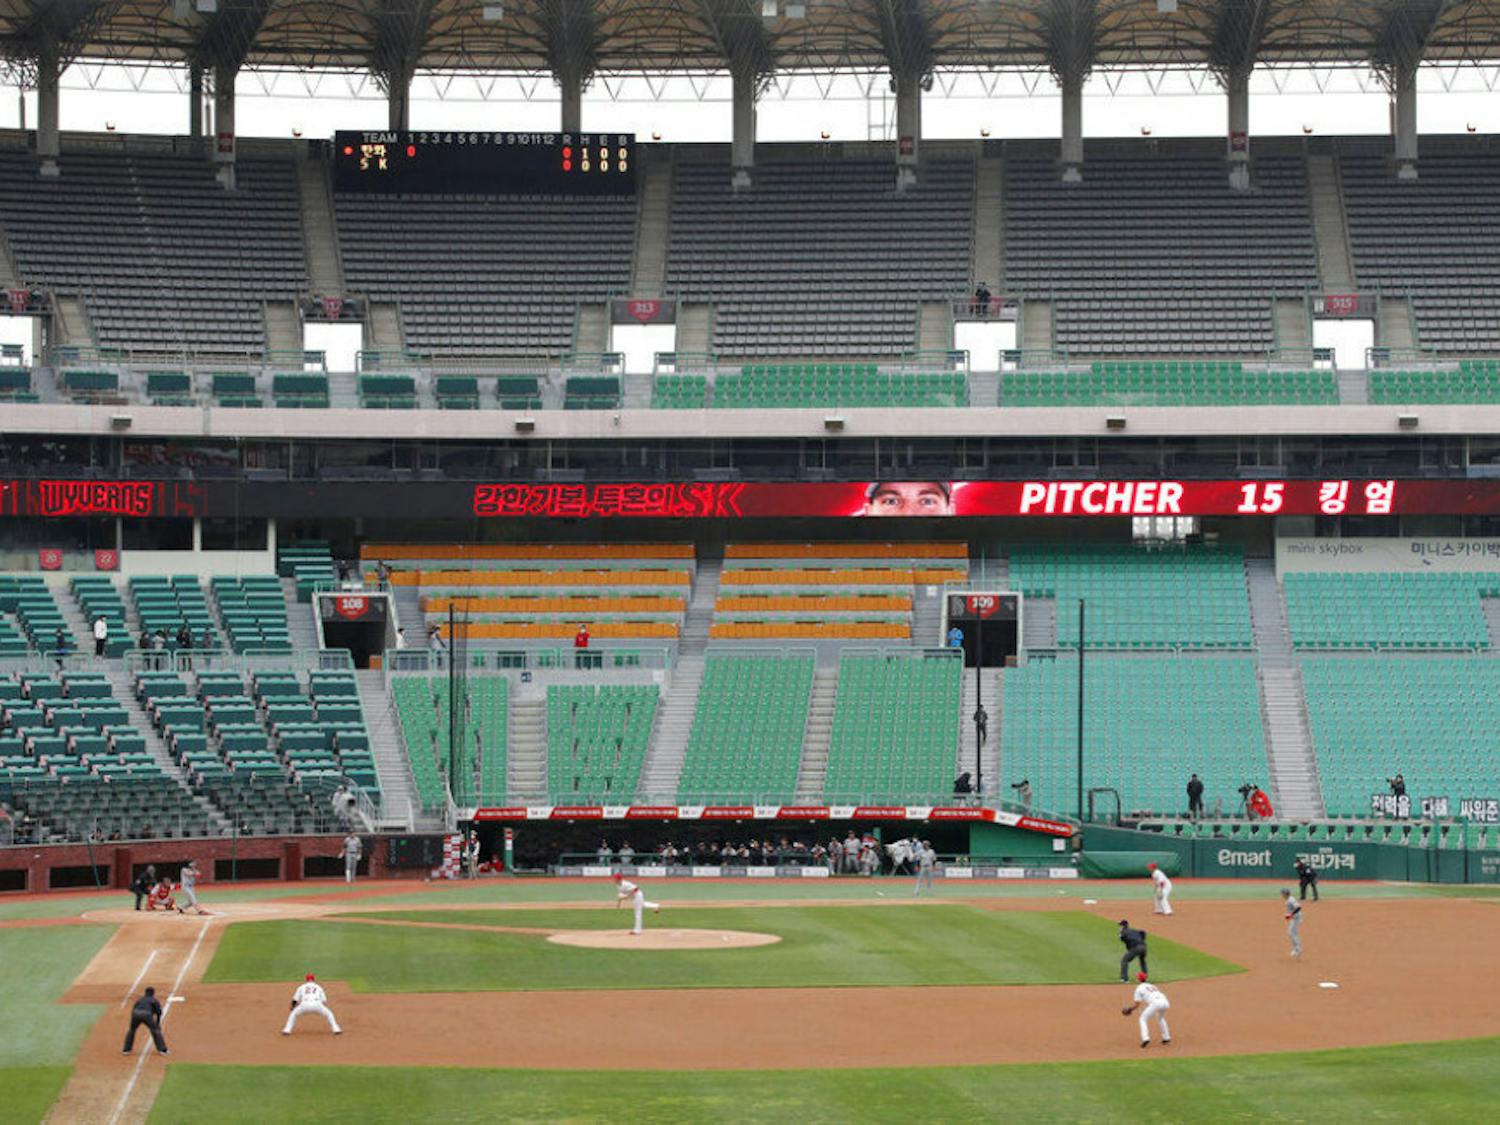 Stadium seats are empty as a part of precaution against the new coronavirus during a baseball game between Hanwha Eagles and SK Wyverns in Incheon, South Korea, Tuesday, May 5, 2020. With umpires fitted with masks and cheerleaders dancing beneath vast rows of empty seats, a new baseball season got underway in South Korea following a weeks-long delay because of the coronavirus pandemic. (AP Photo/Lee Jin-man)